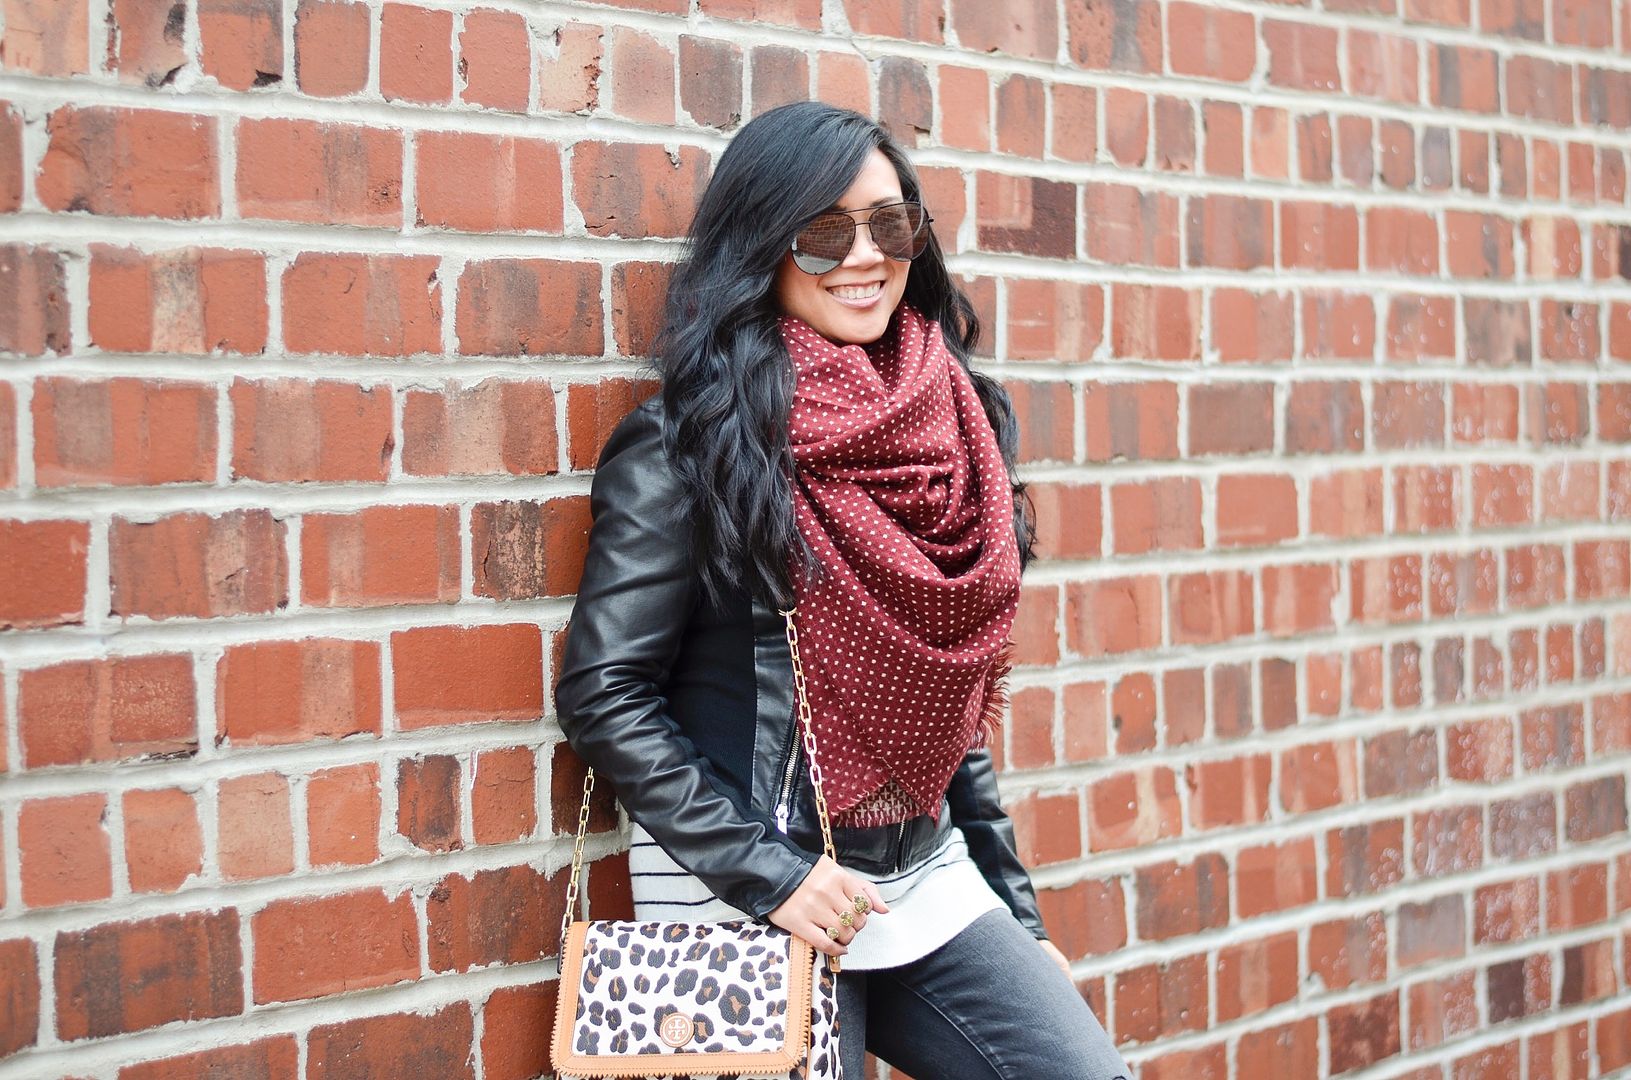 Express minus the leather moto jacket, papderdolls boutique dotted blanket scarf, Tory Burch ocelot bag